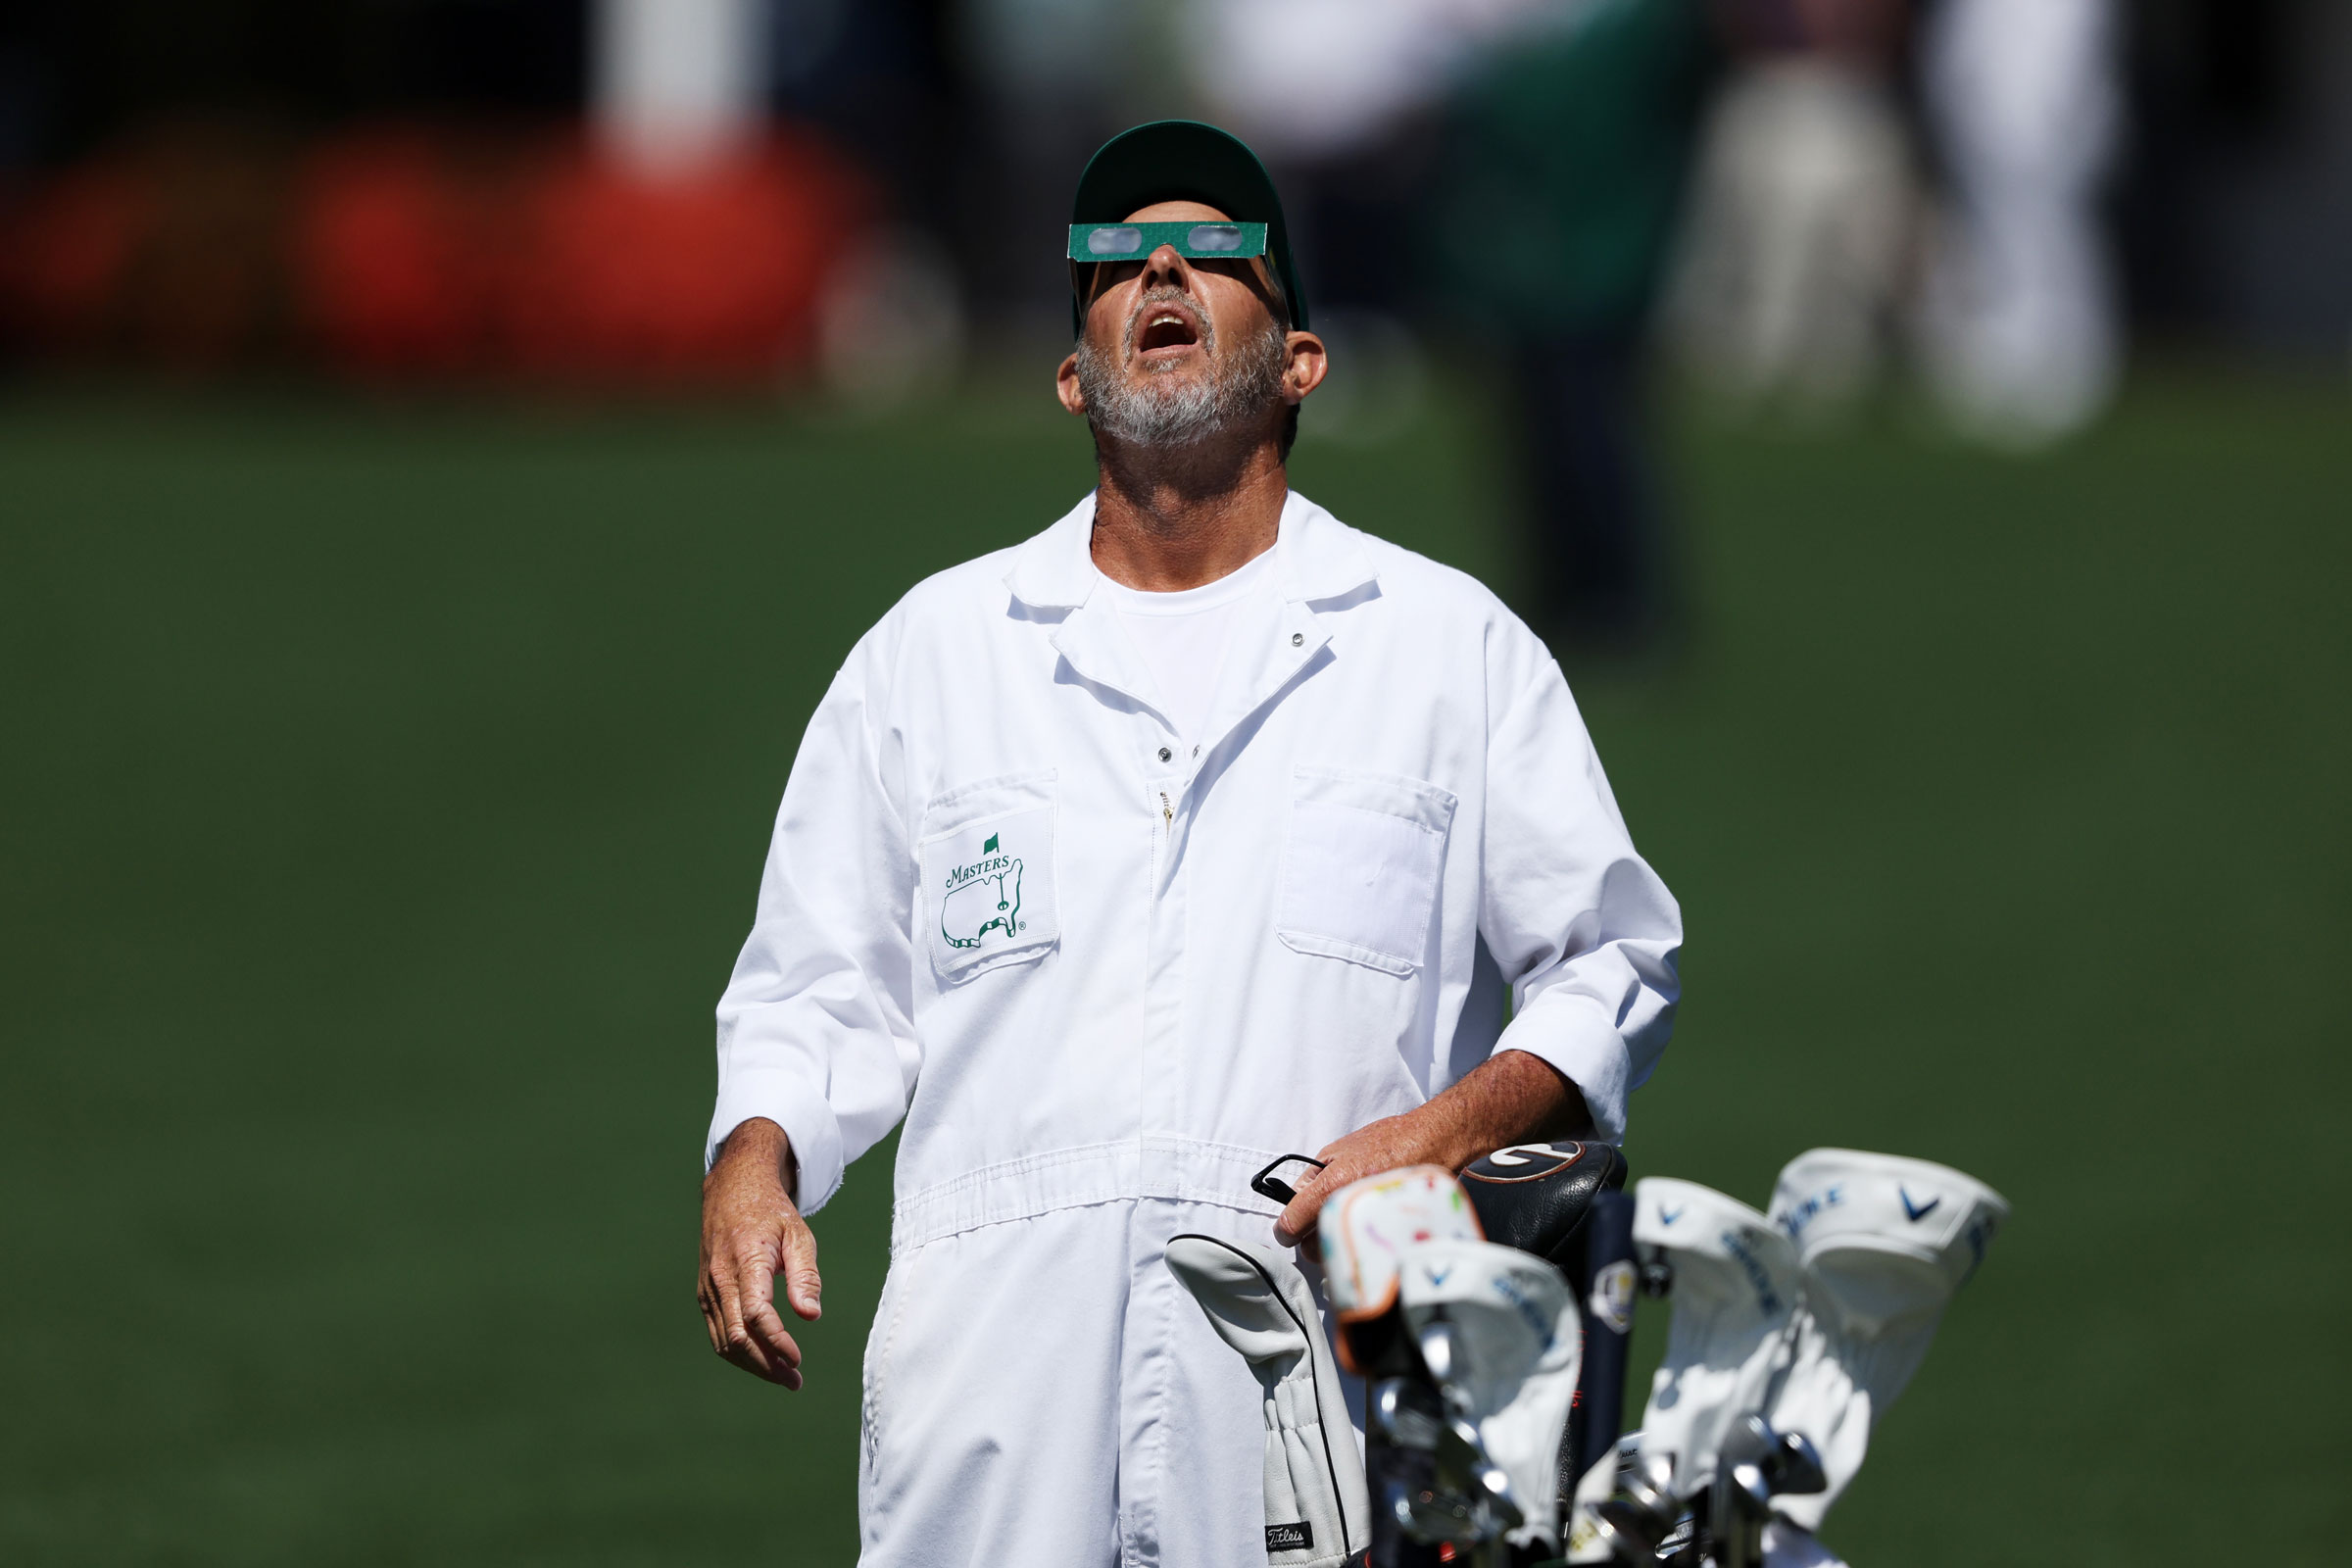 A caddie uses glasses to view the eclipse during a practice round prior to the 2024 Masters Tournament